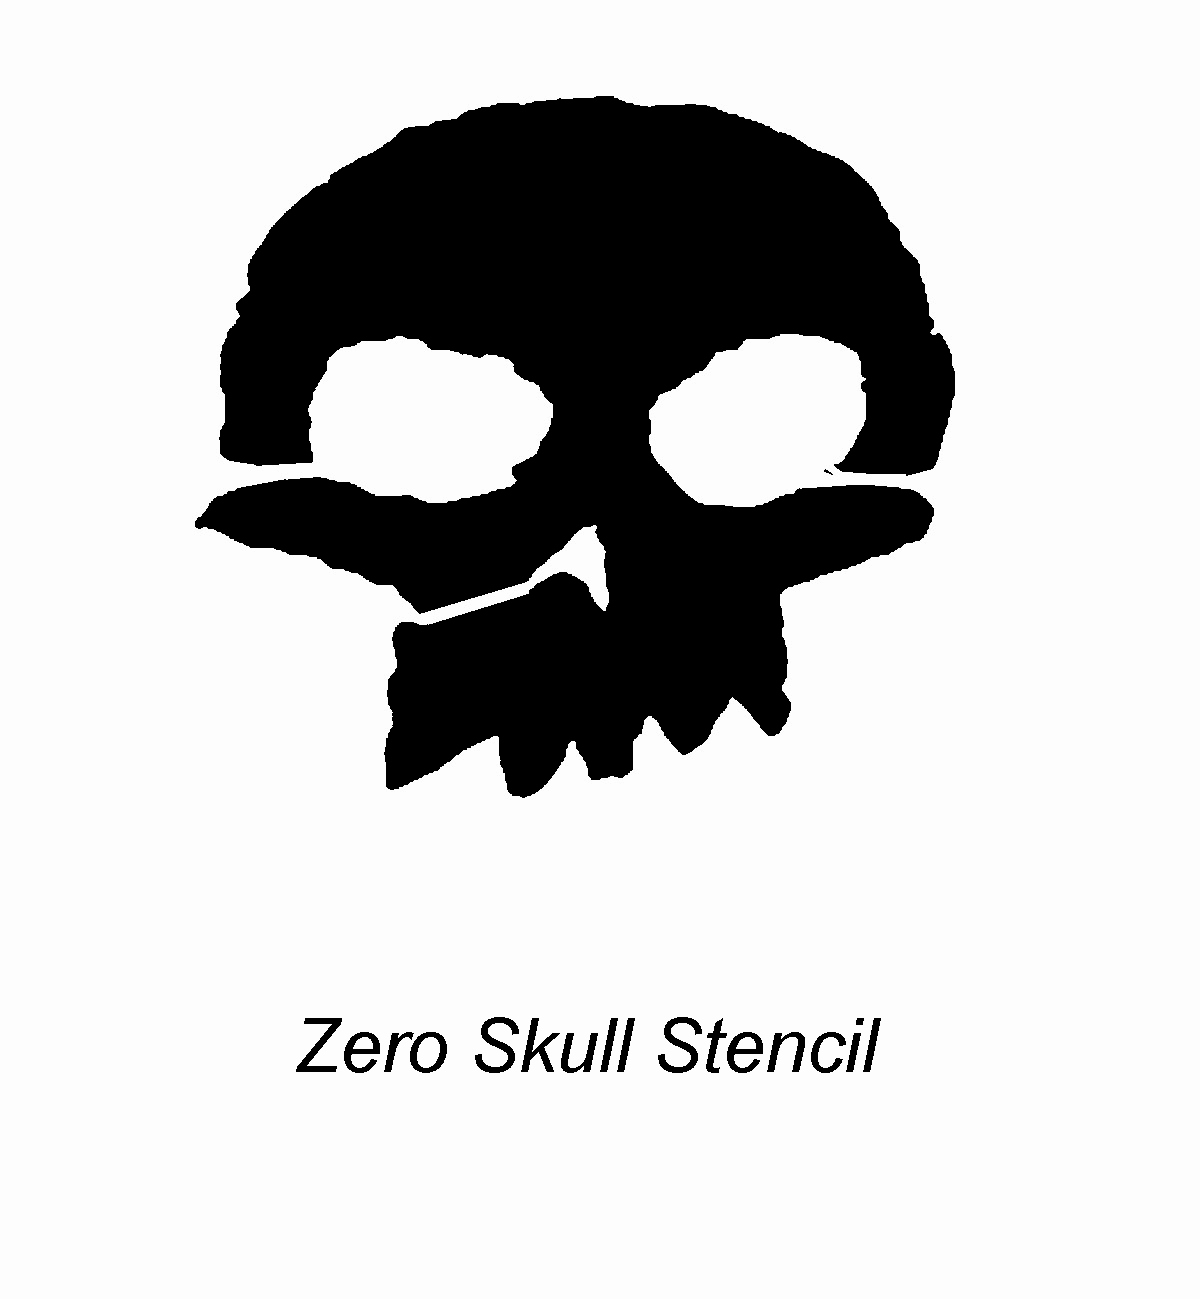 Skull Stencils for Spray Painting Luxury Stencil Requests for September 2007